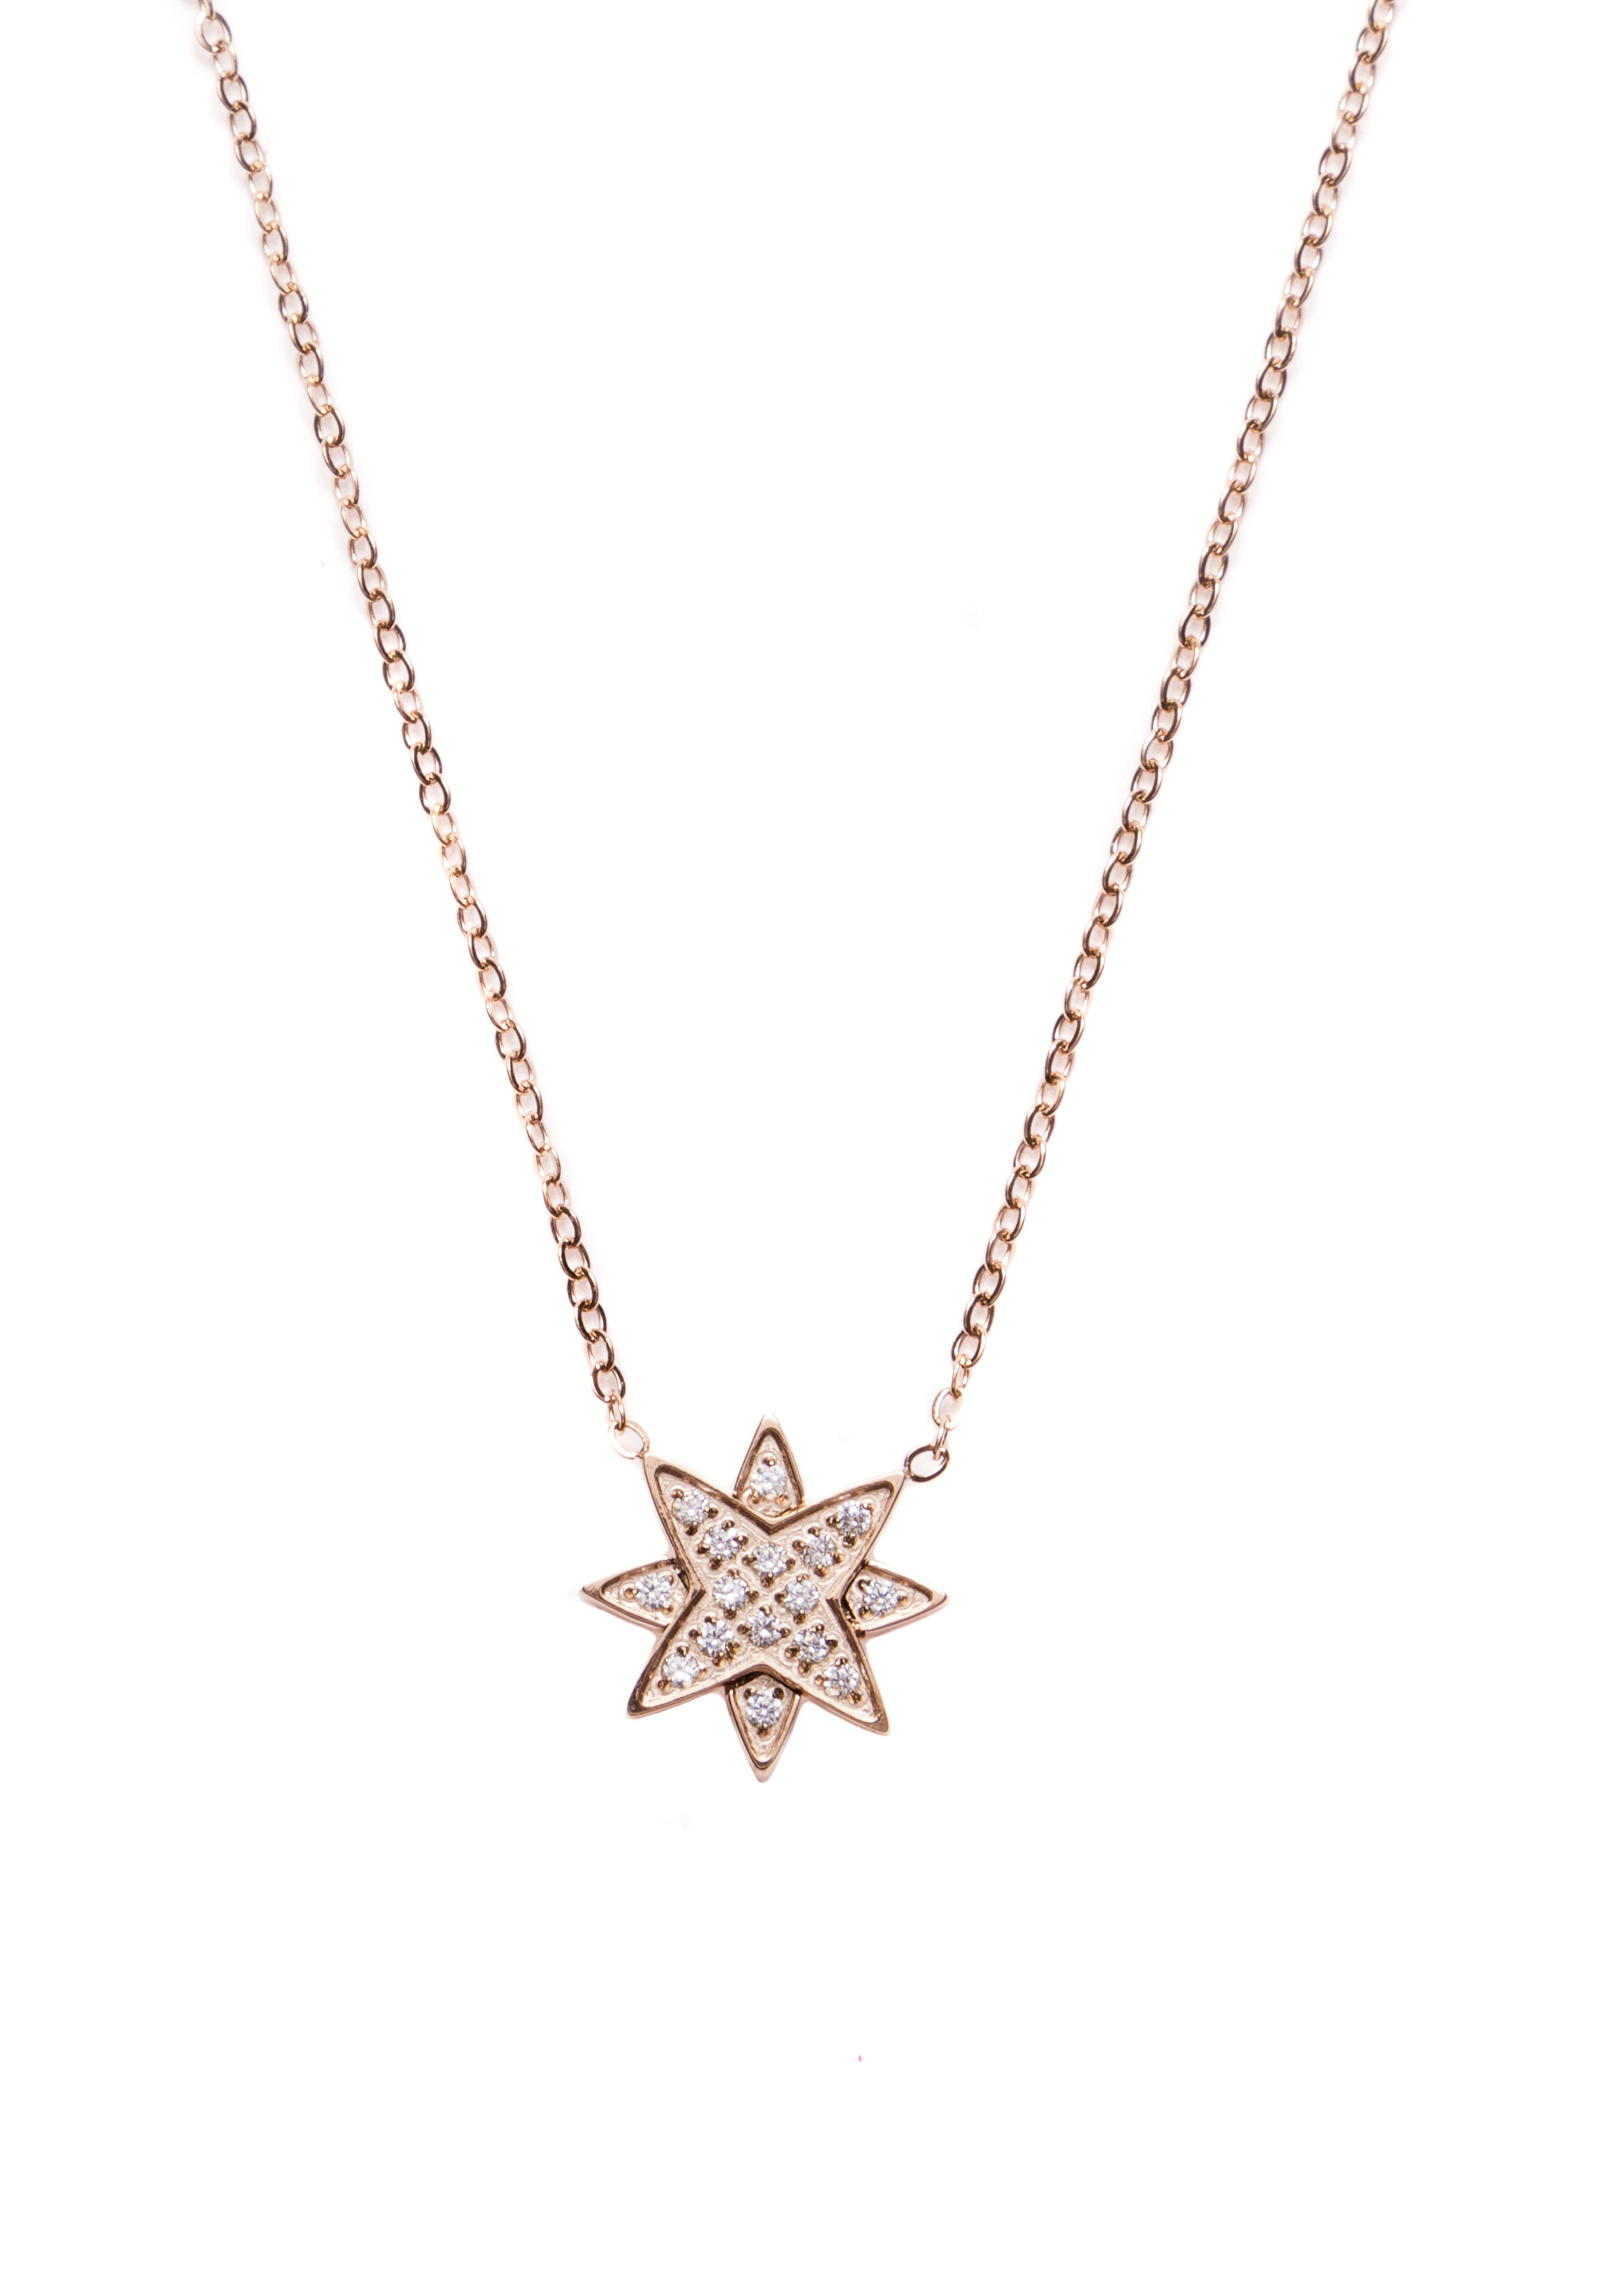 Details about   Designer Inspired 925 Sterling Silver White Crystal Crown Pendant+Necklace Chain